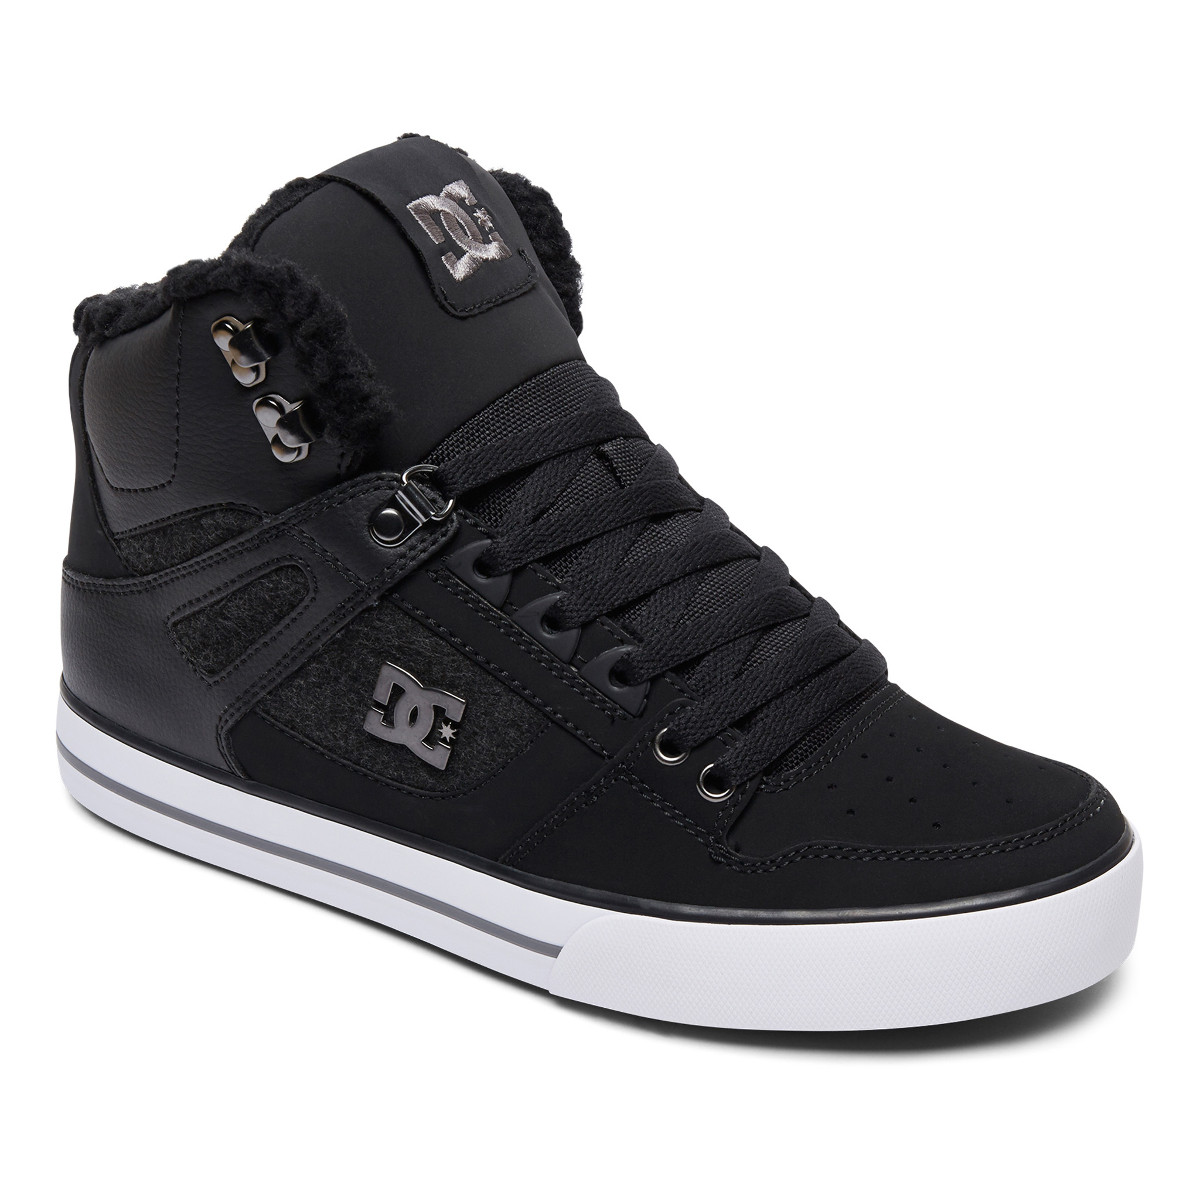 DC Winter Shoes Spartan High WC WNT Black/Armor